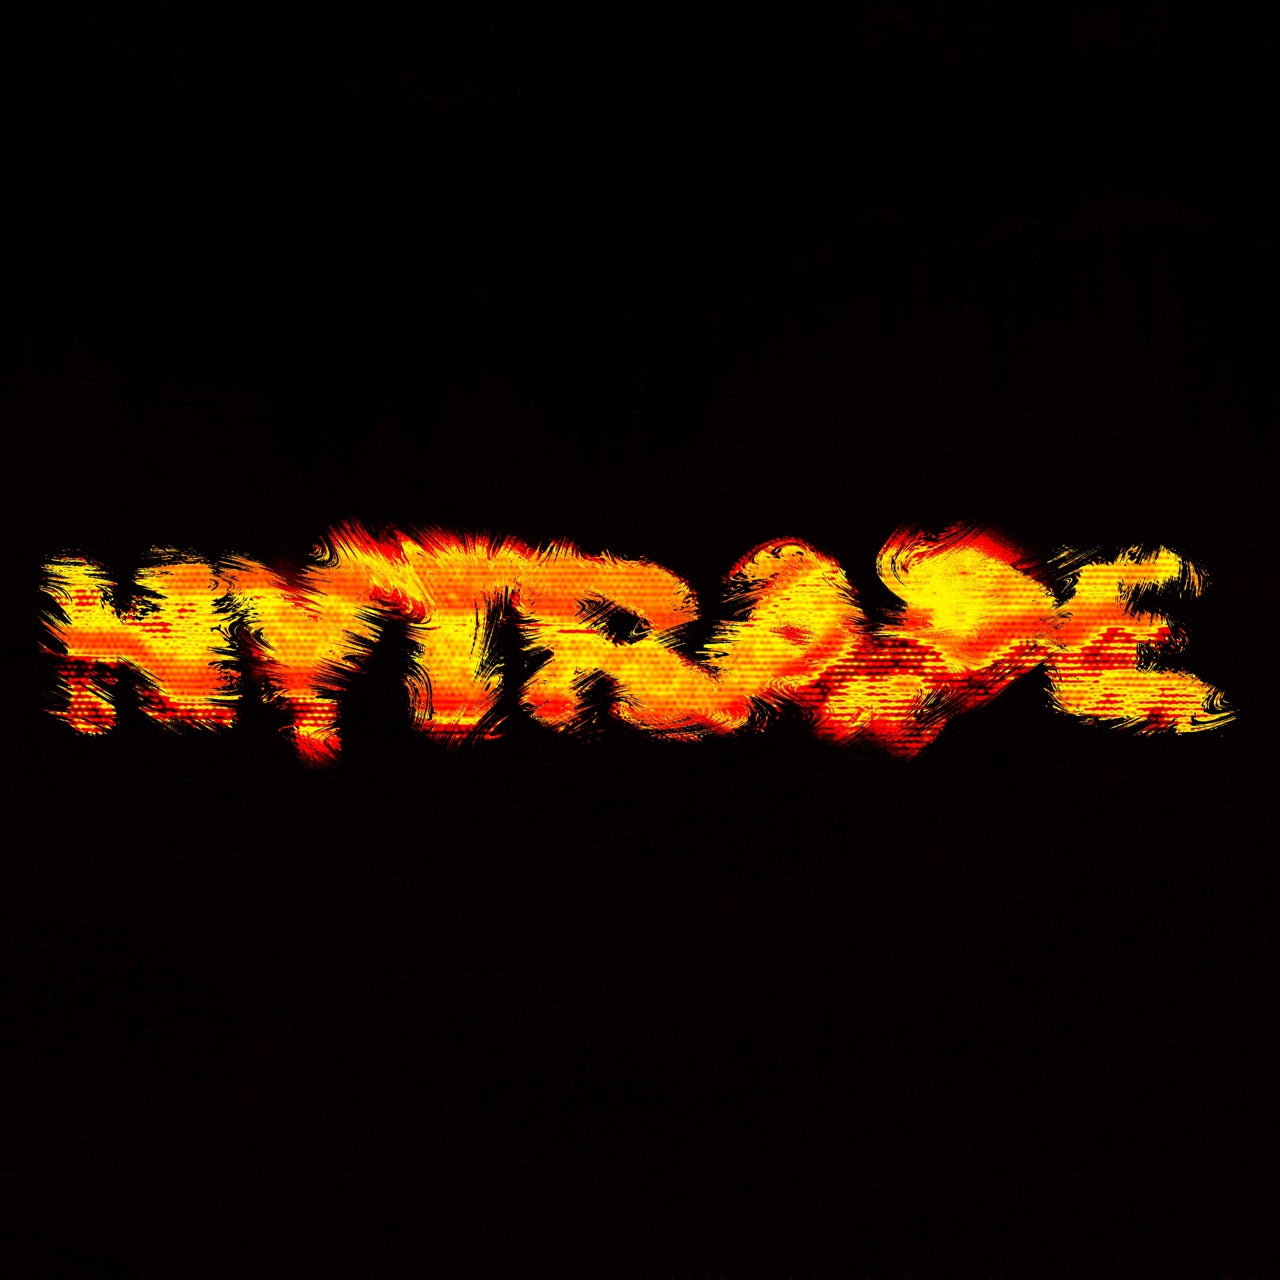 ABSTRACT BURN TEXT EFFECT HYTRAPE